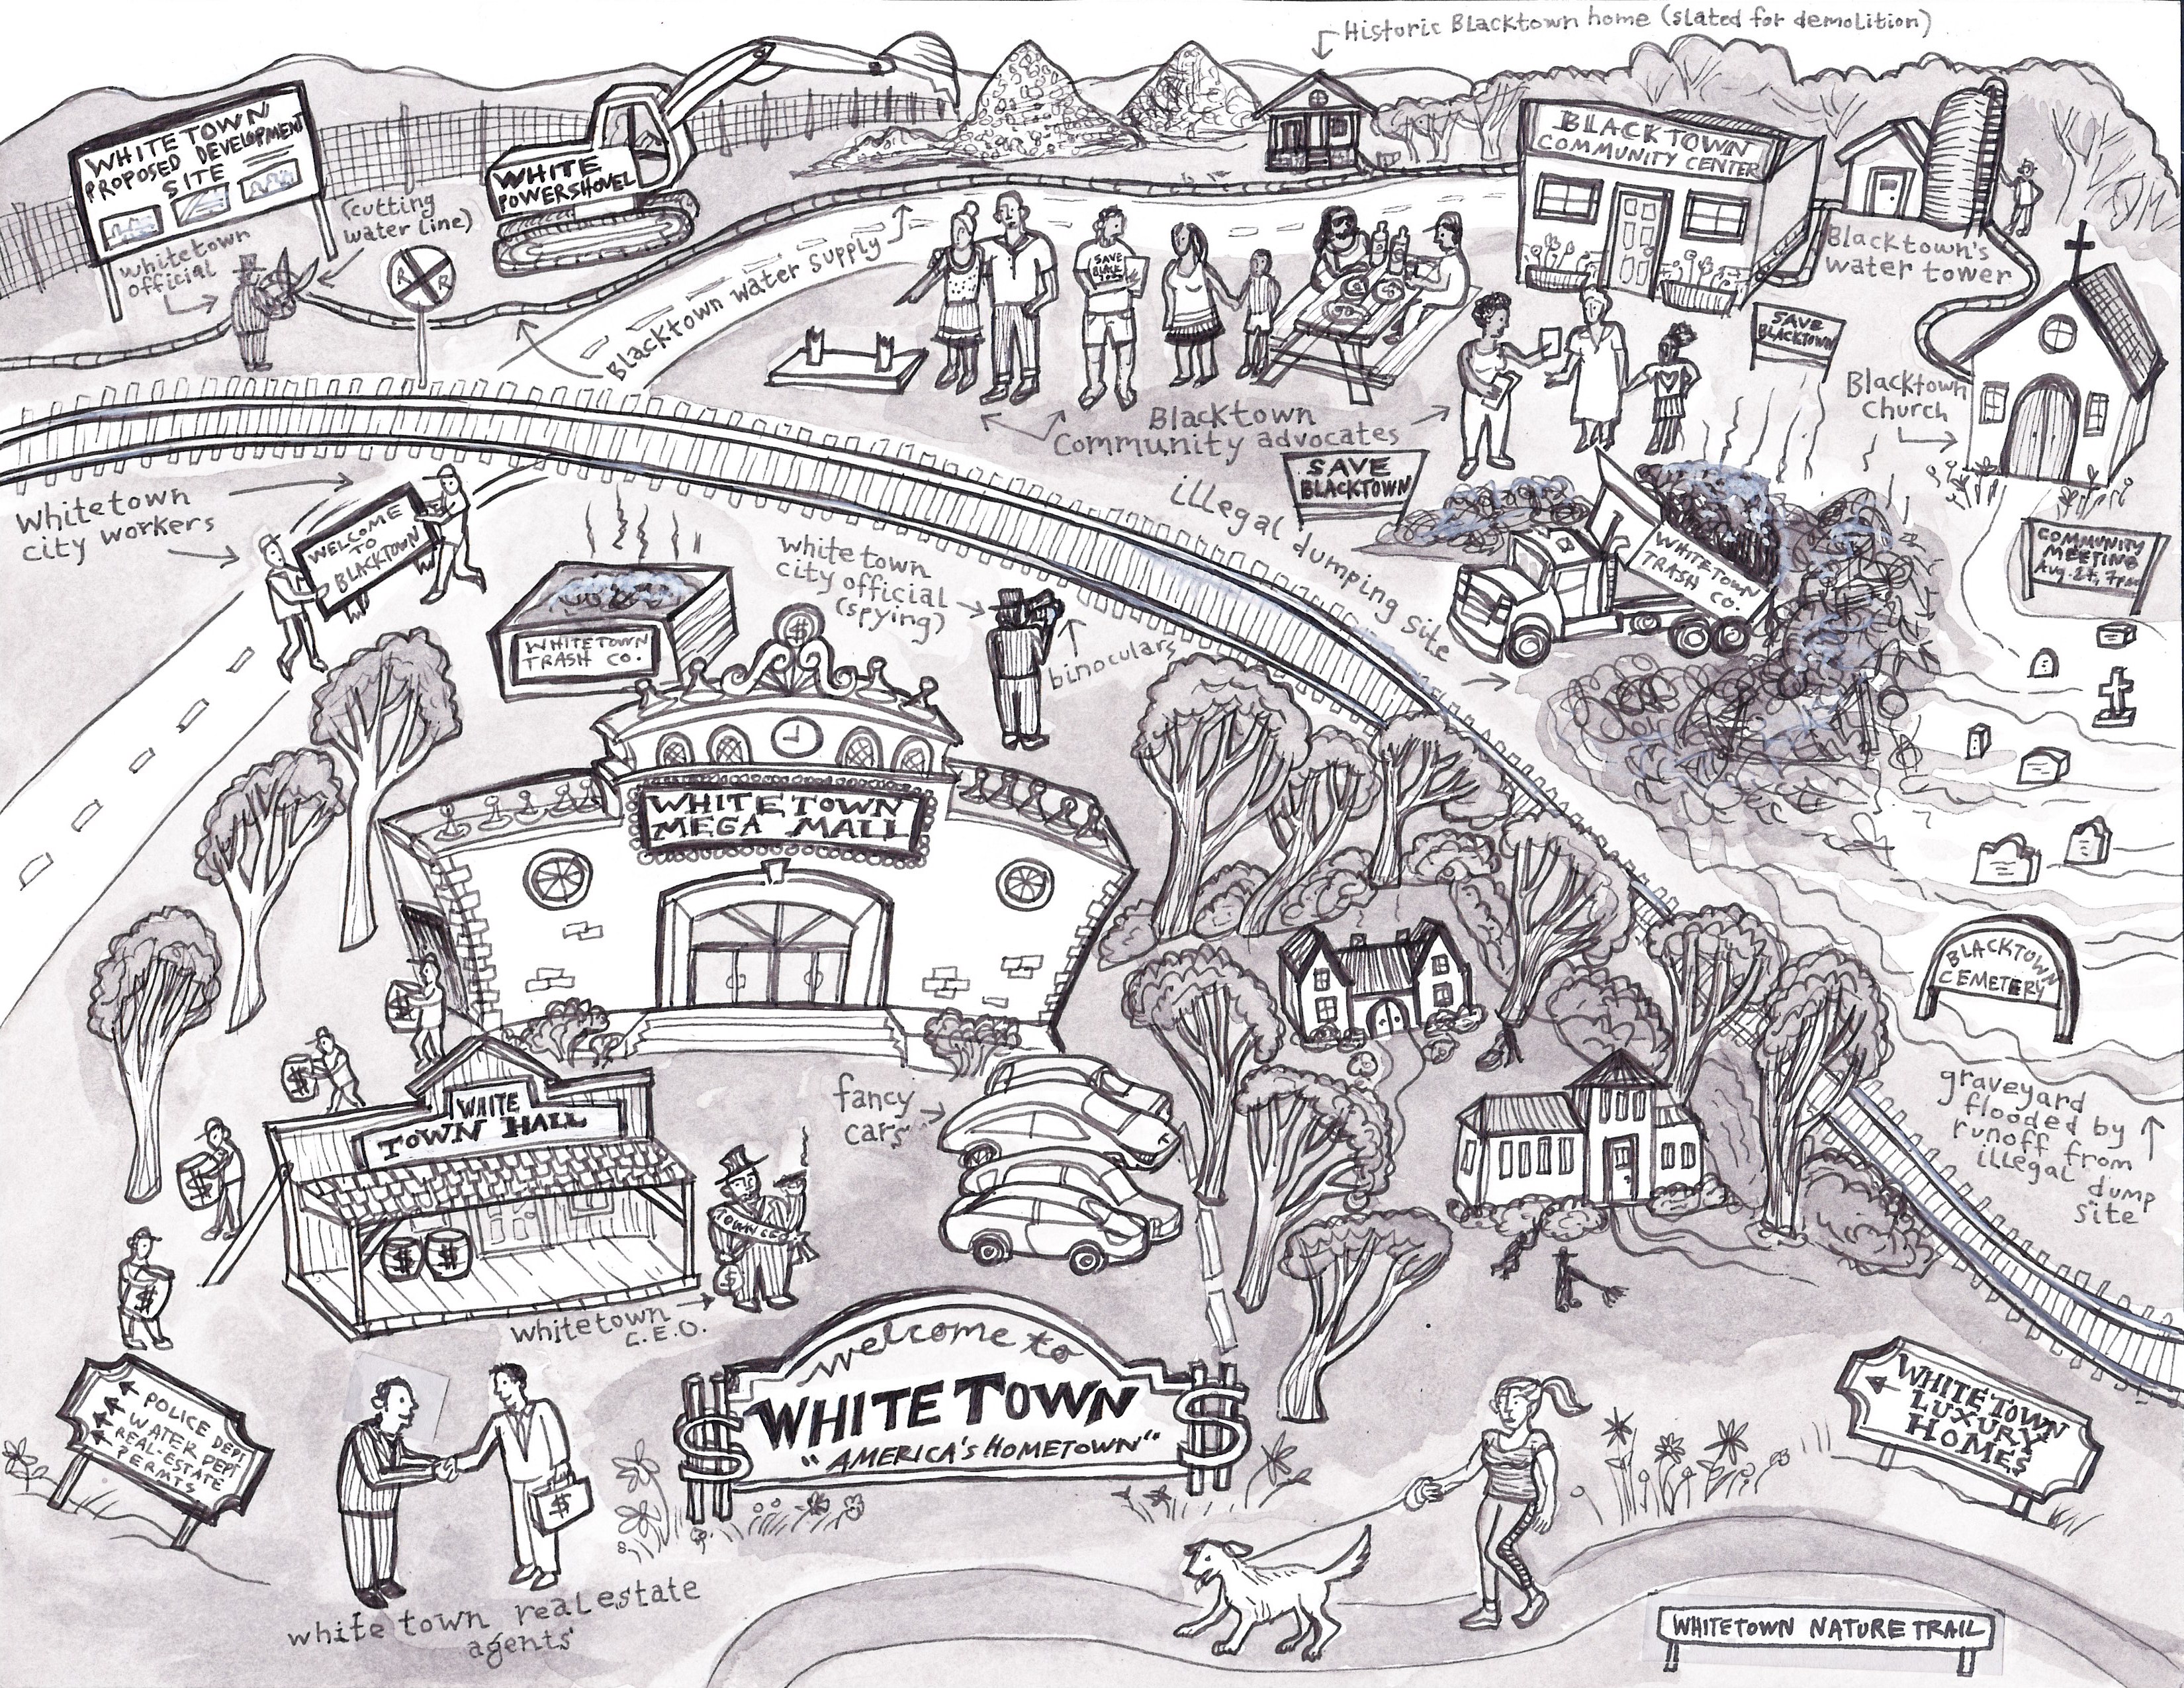 A black and white illustration shows various components of "Blacktown" and "Whitetown."